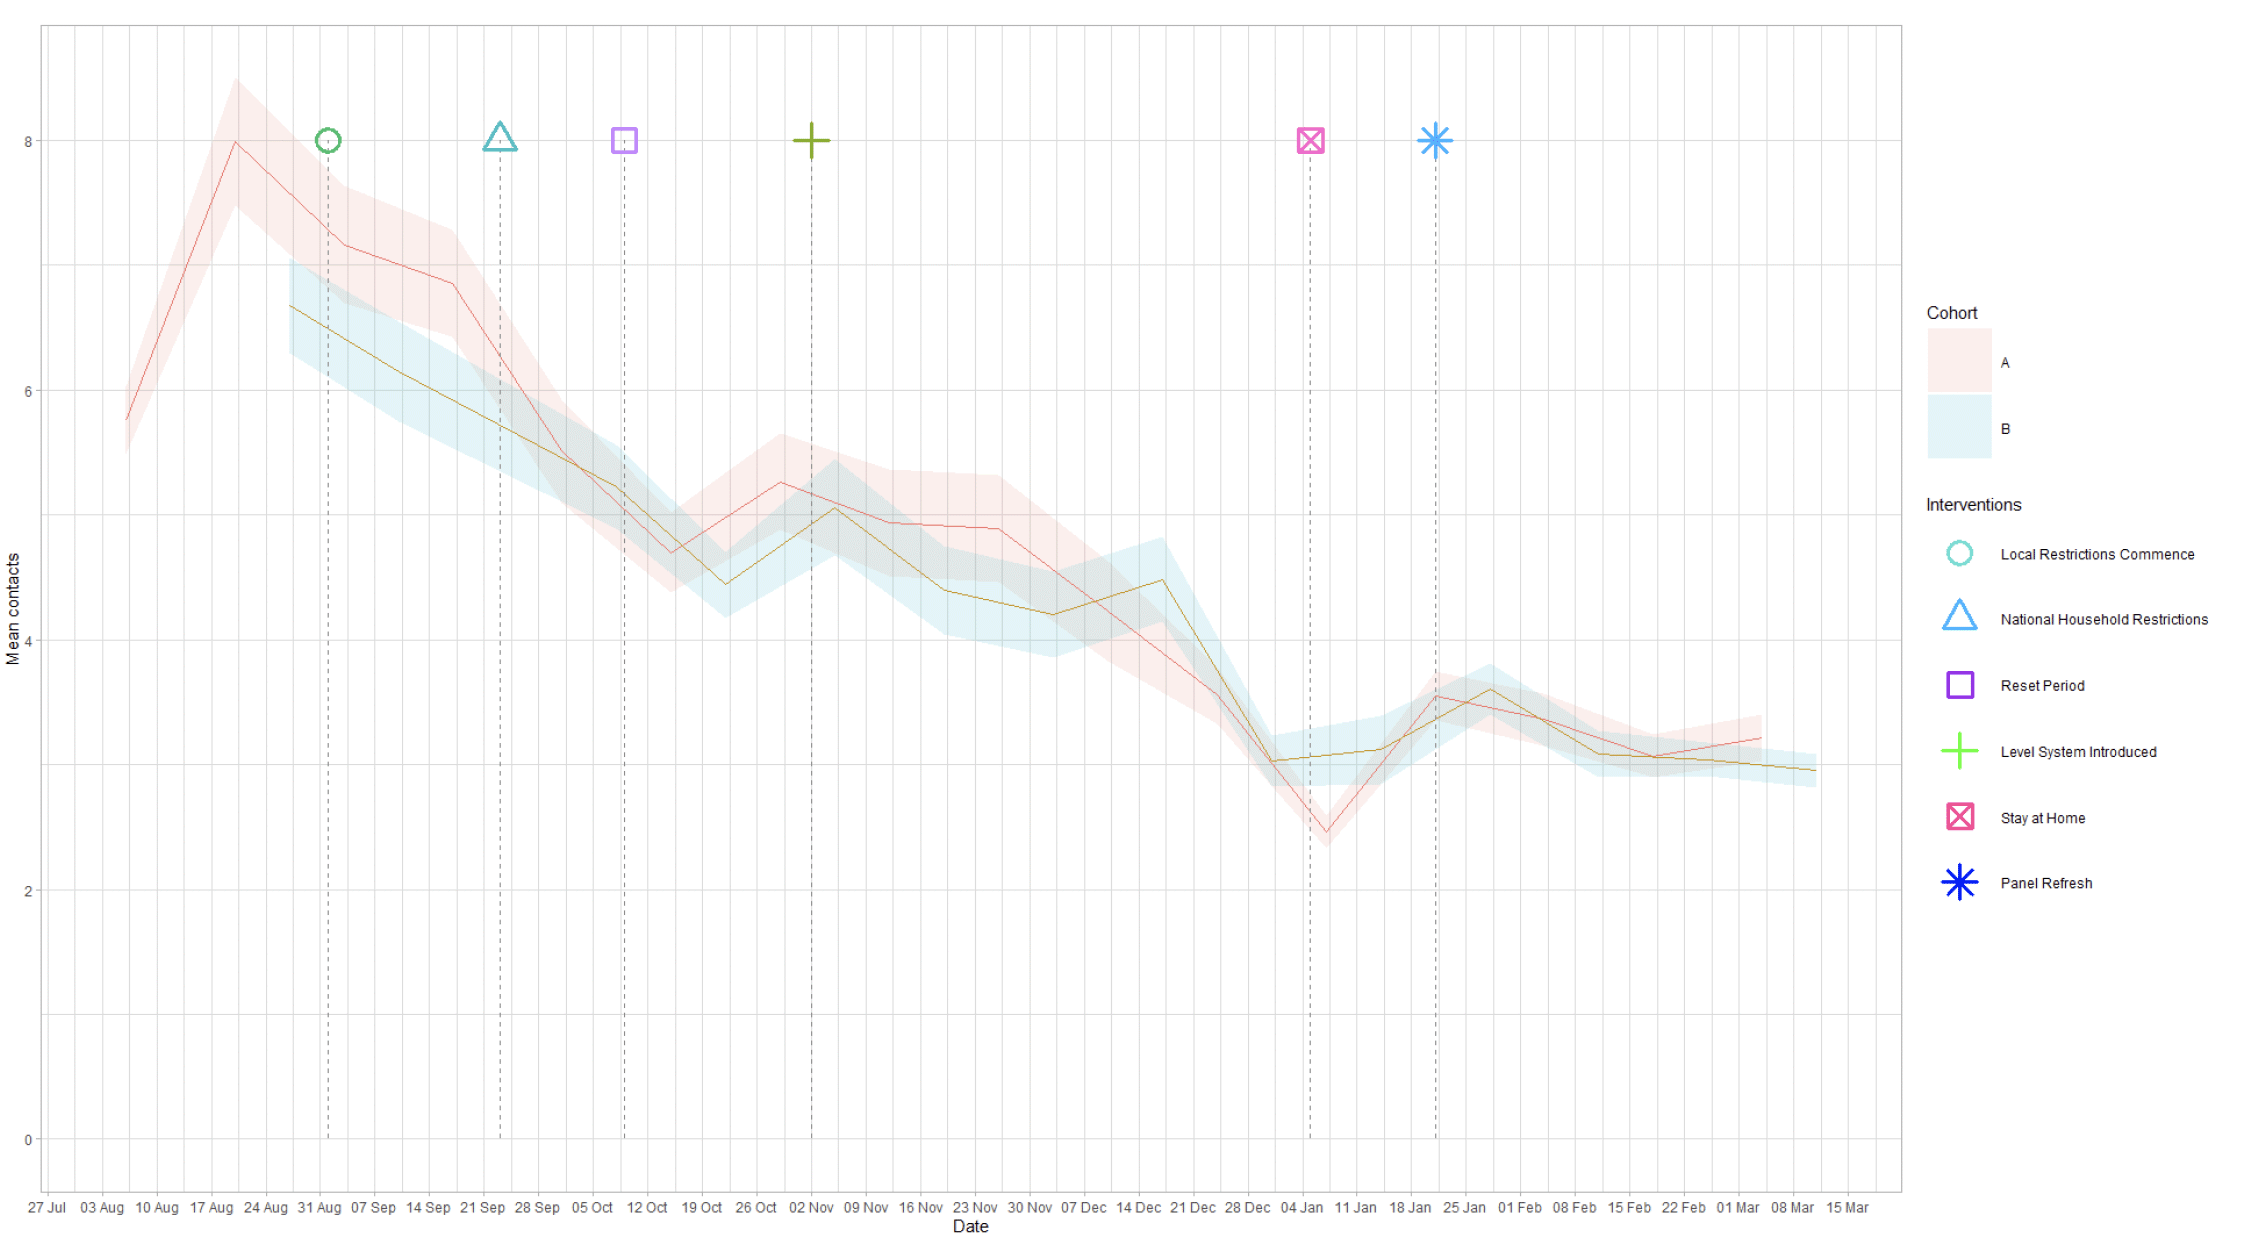 A line graph showing mean adult contacts by age group for panel A and panel B in the work setting from 6 Aug to 17 Mar.